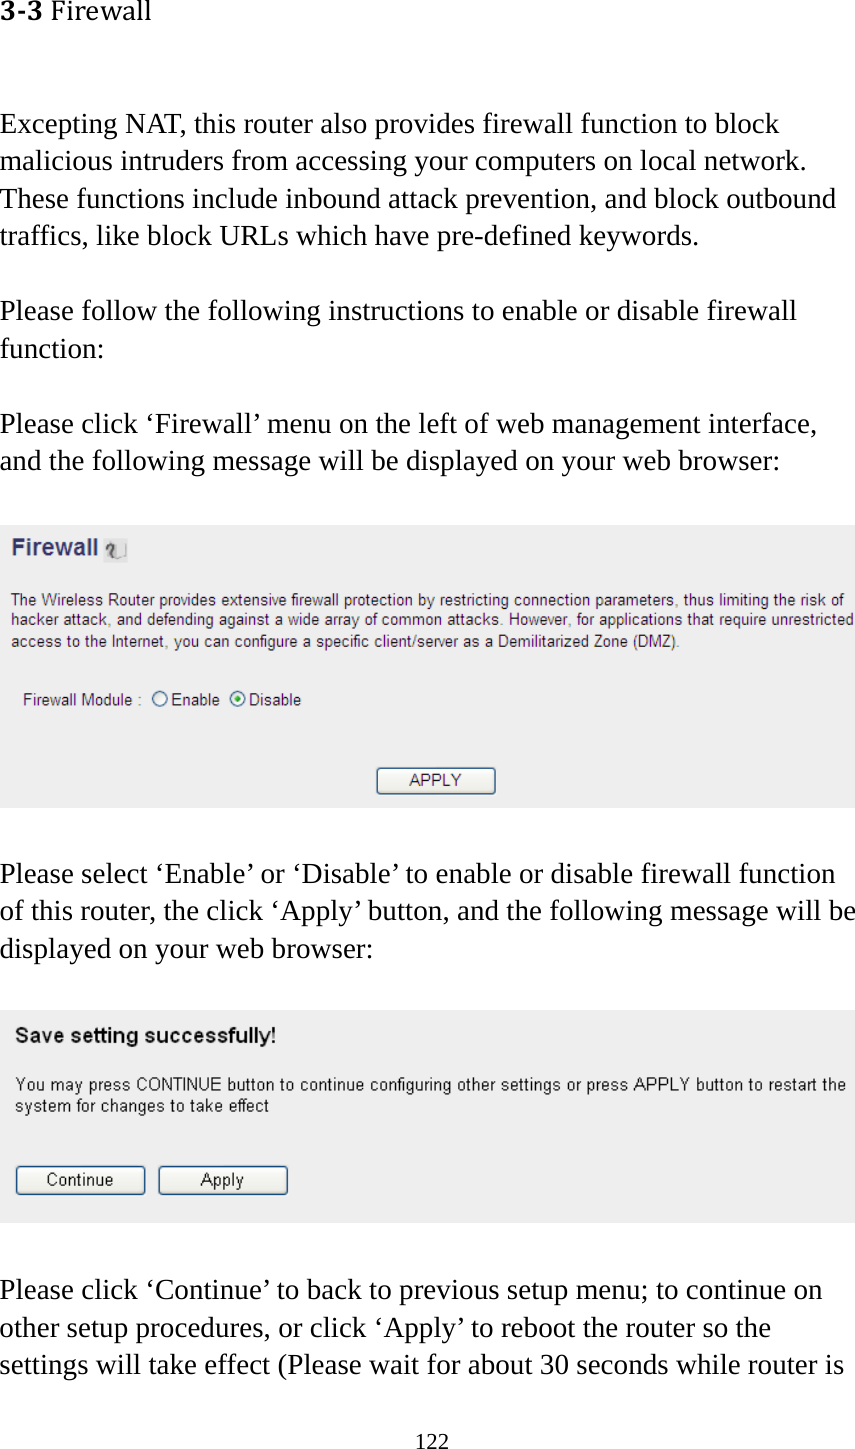 122 33Firewall Excepting NAT, this router also provides firewall function to block malicious intruders from accessing your computers on local network. These functions include inbound attack prevention, and block outbound traffics, like block URLs which have pre-defined keywords.  Please follow the following instructions to enable or disable firewall function:  Please click ‘Firewall’ menu on the left of web management interface, and the following message will be displayed on your web browser:    Please select ‘Enable’ or ‘Disable’ to enable or disable firewall function of this router, the click ‘Apply’ button, and the following message will be displayed on your web browser:    Please click ‘Continue’ to back to previous setup menu; to continue on other setup procedures, or click ‘Apply’ to reboot the router so the settings will take effect (Please wait for about 30 seconds while router is 